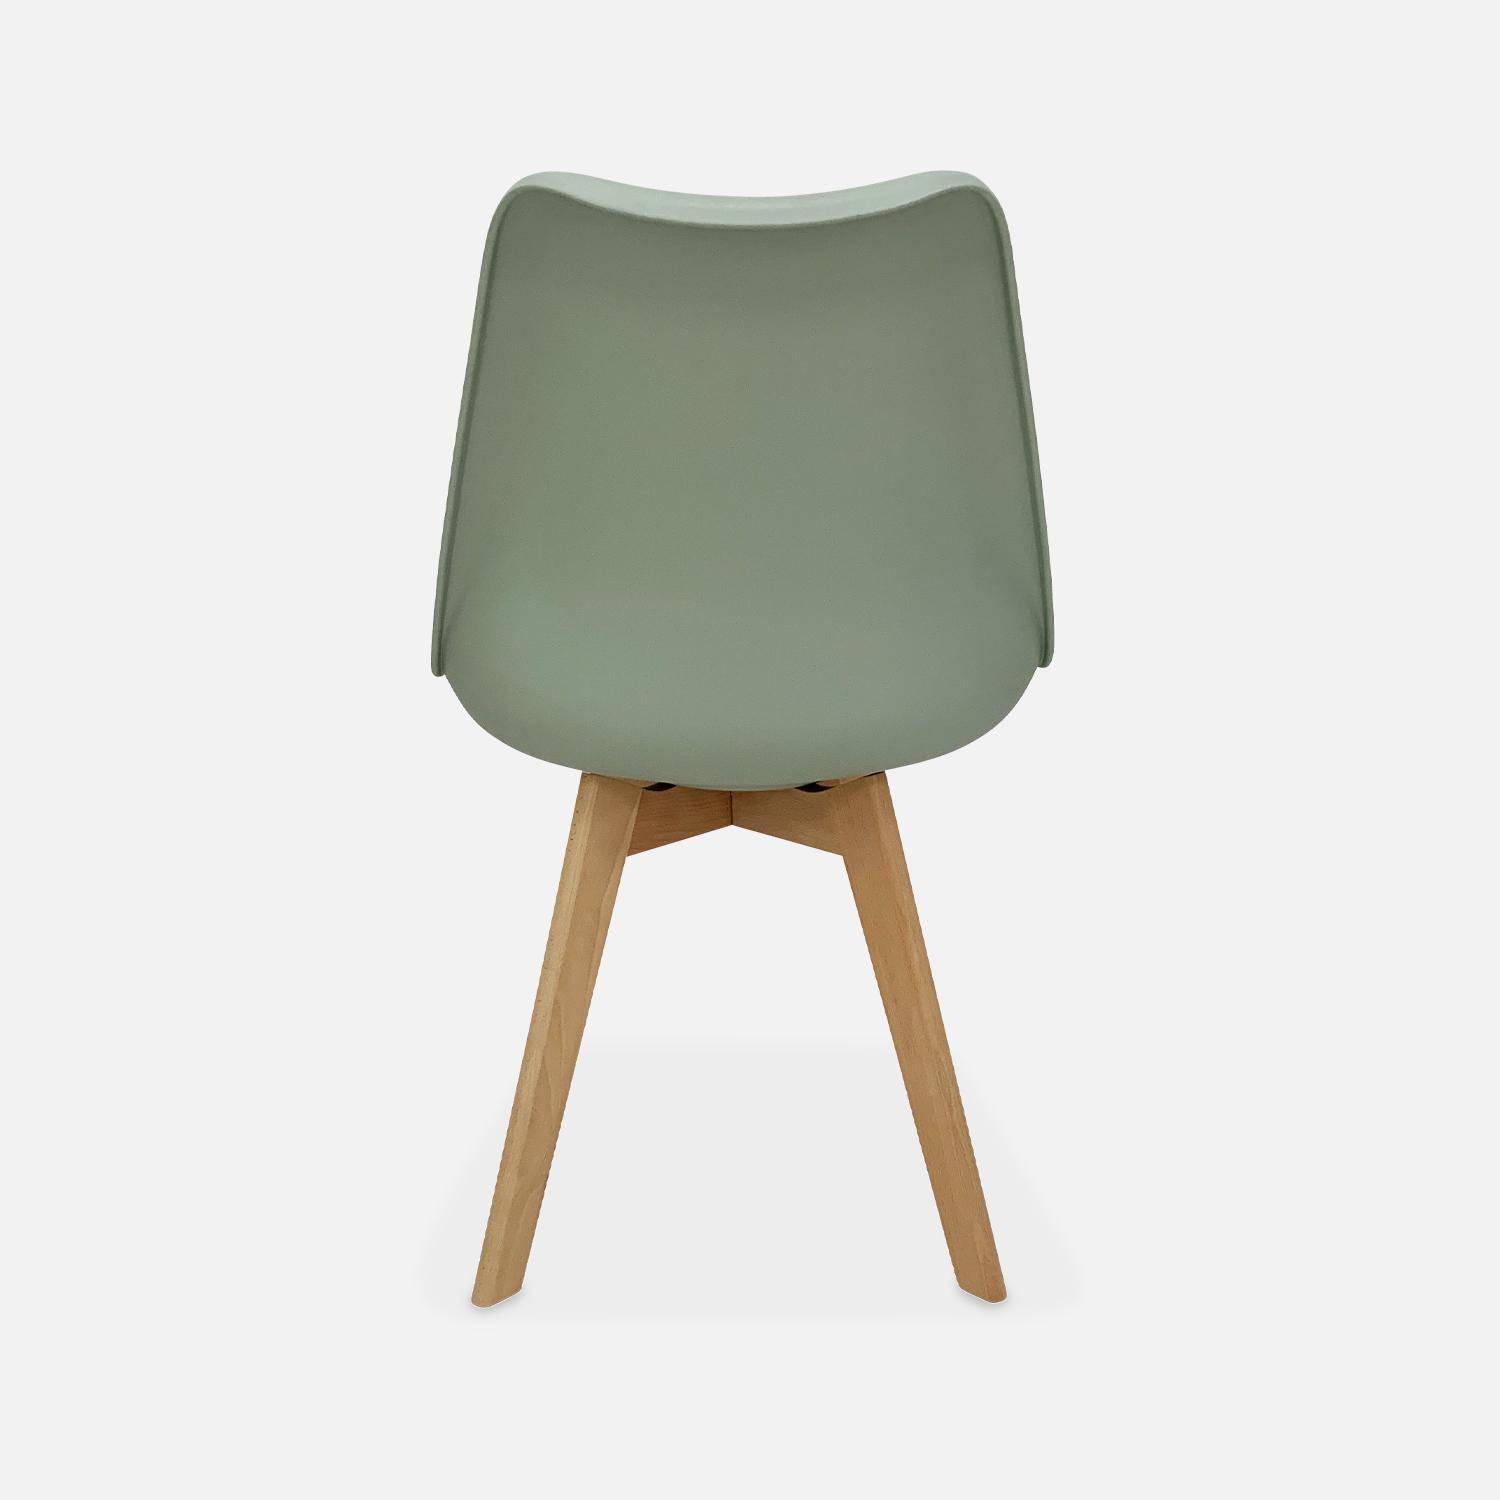 Pair of scandi-style dining chairs, green, L49xD55xH81cm, NILS Photo4